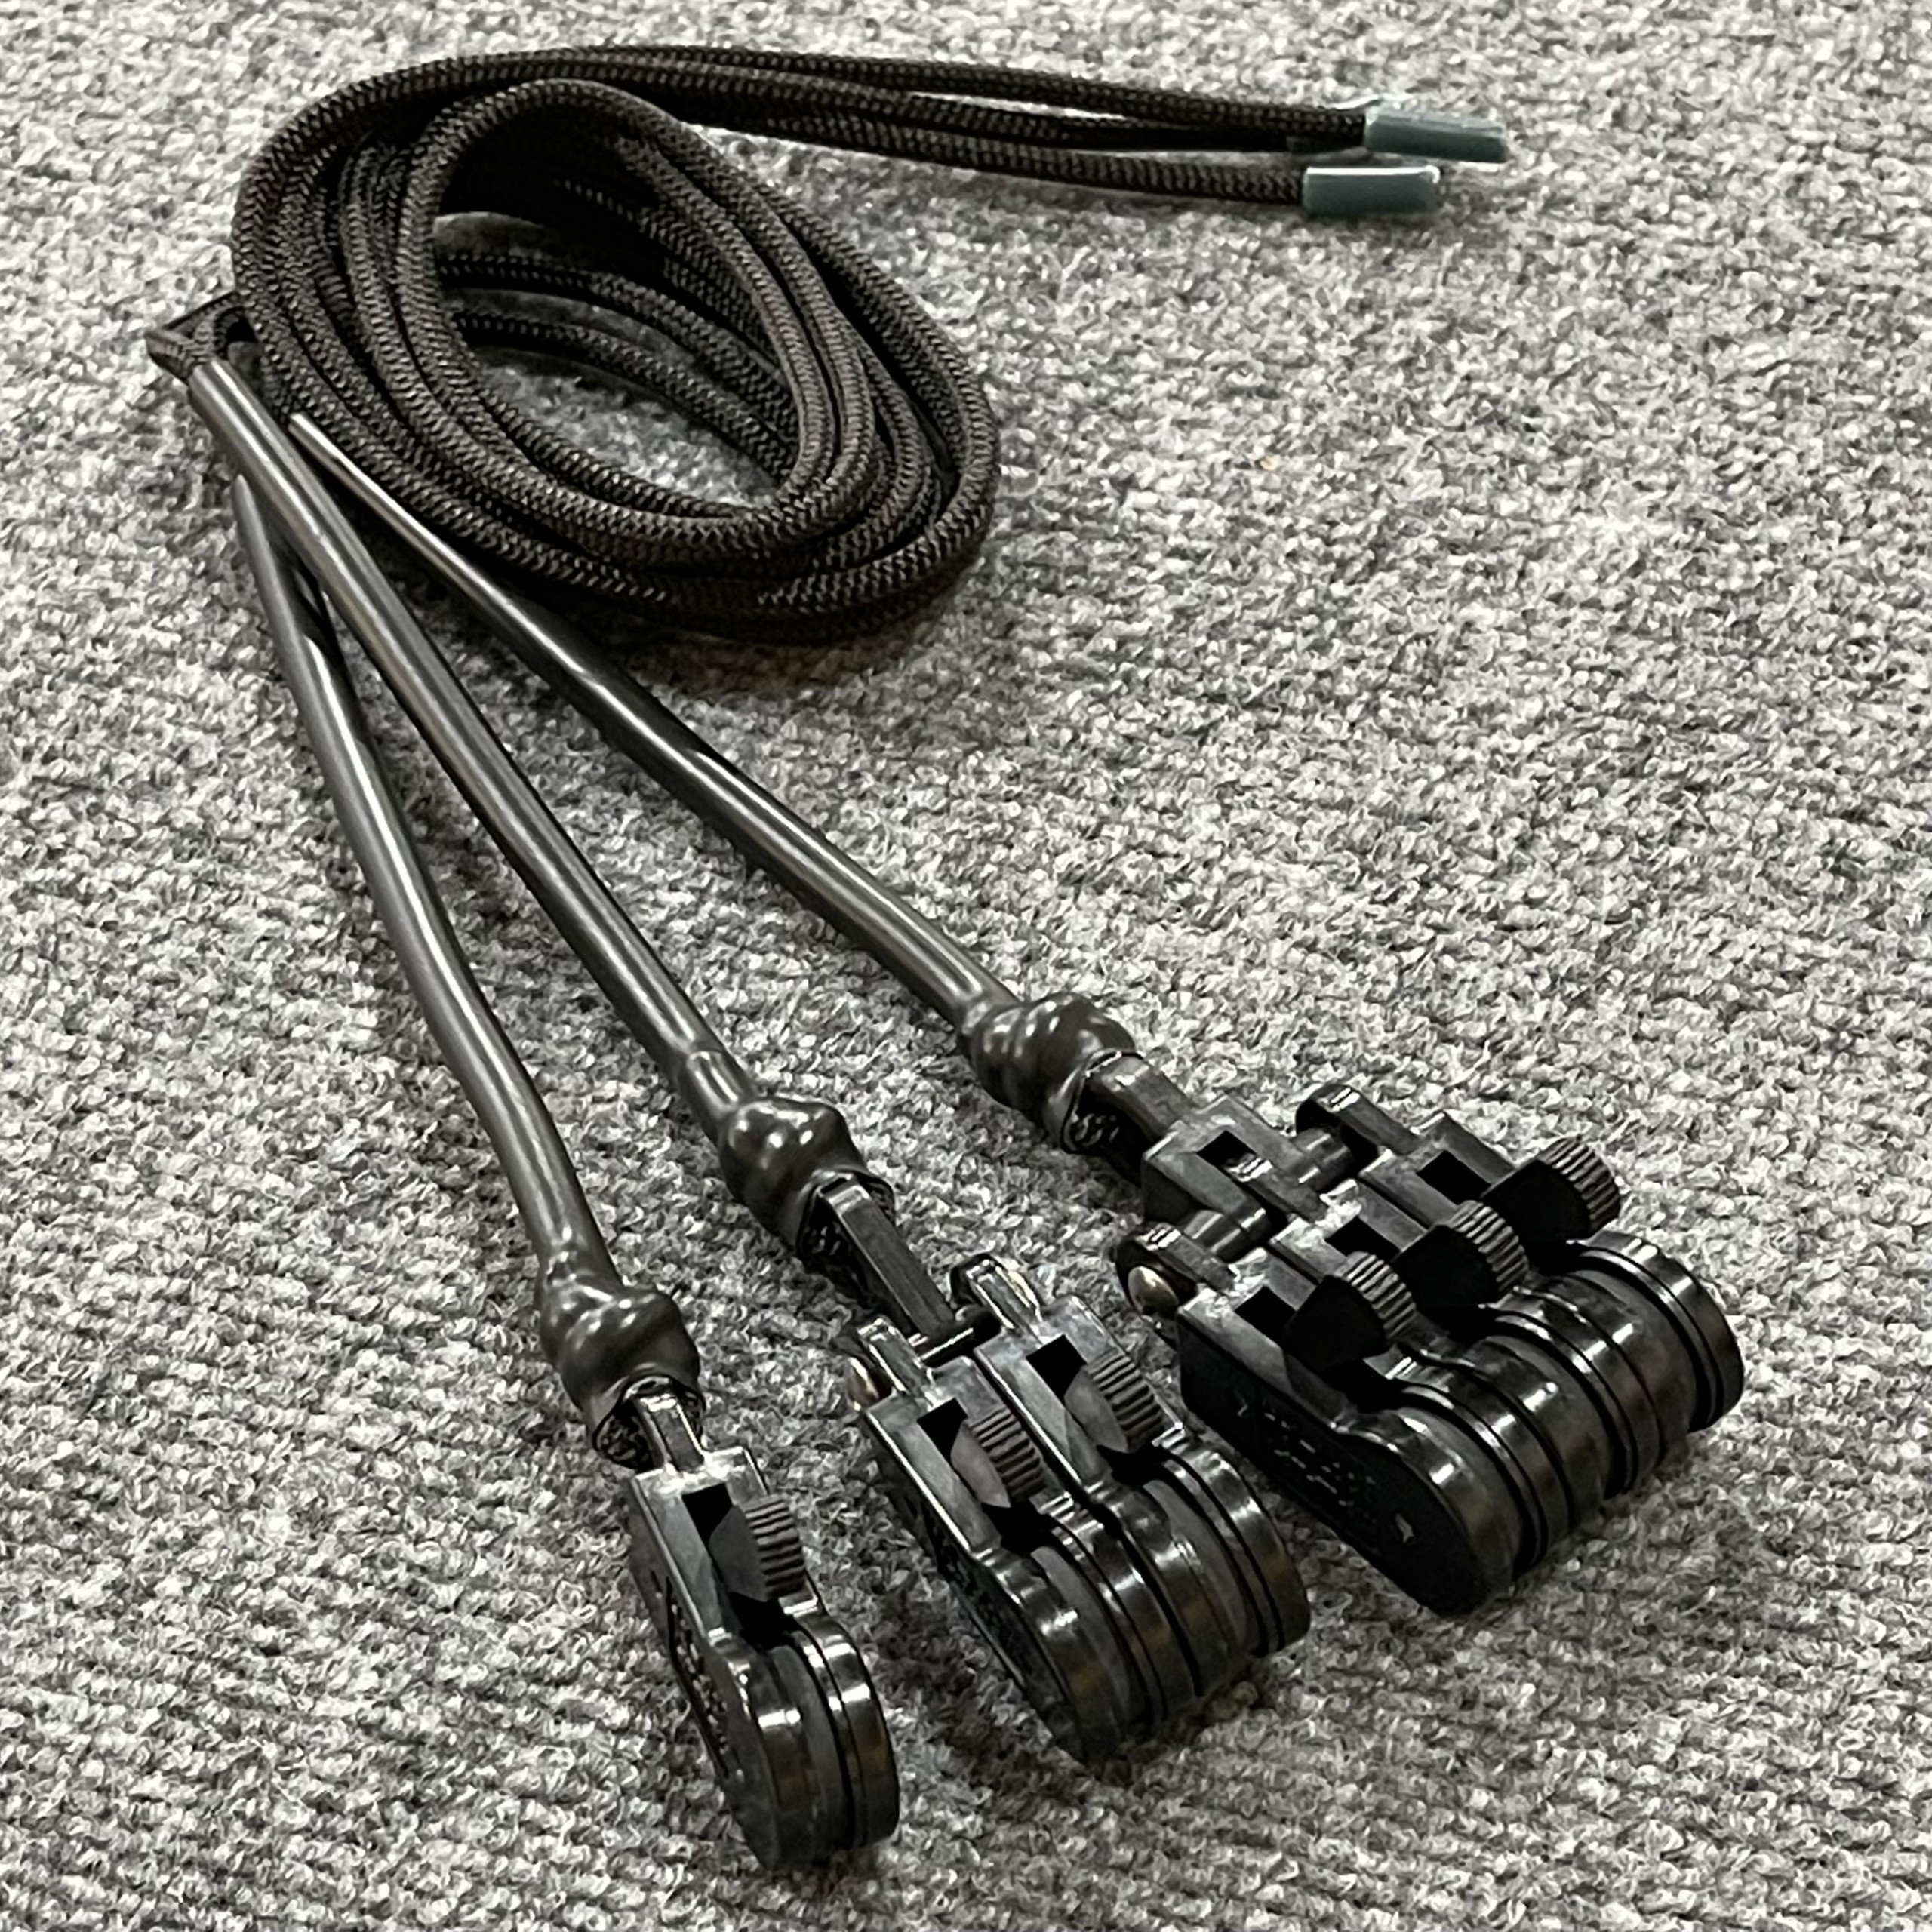 https://www.marshtackycarbon.com/wp-content/uploads/2022/04/Hal-Lock-Pulleys-with-braided-cord-3-scaled.jpg